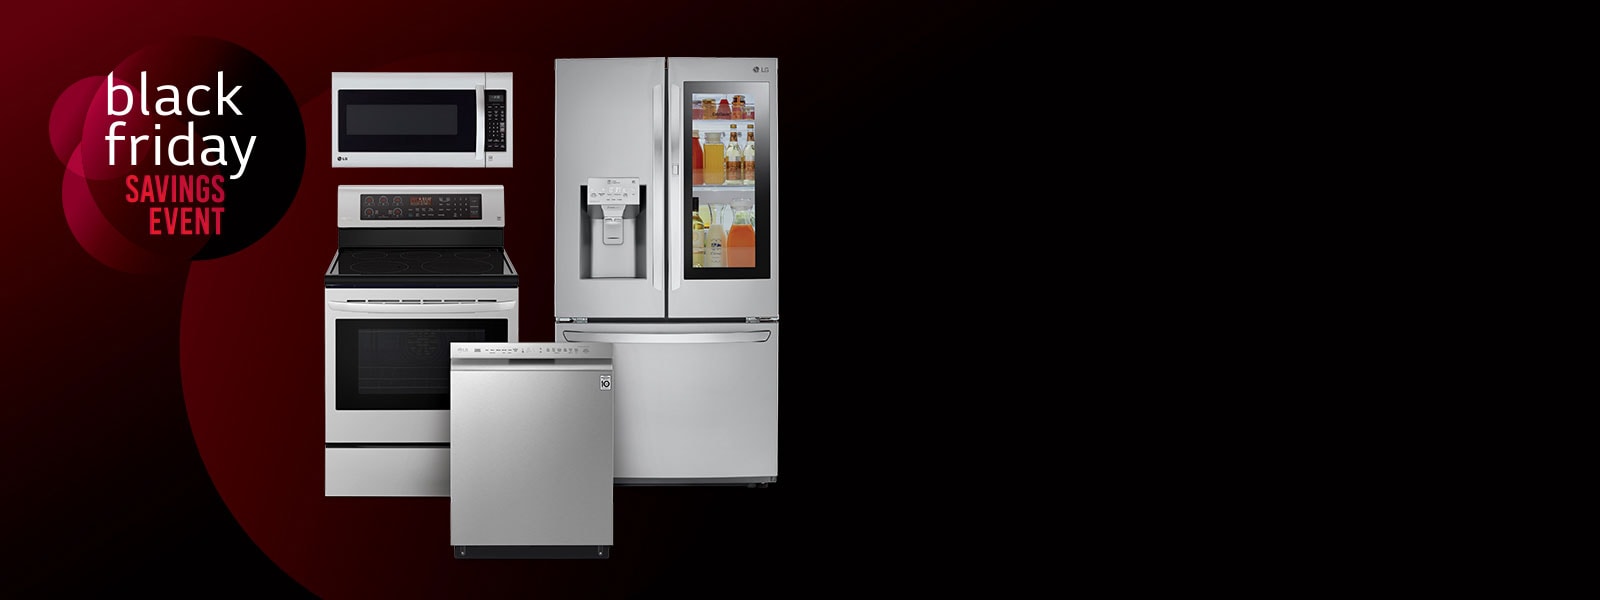 LG Appliance product collage on black background